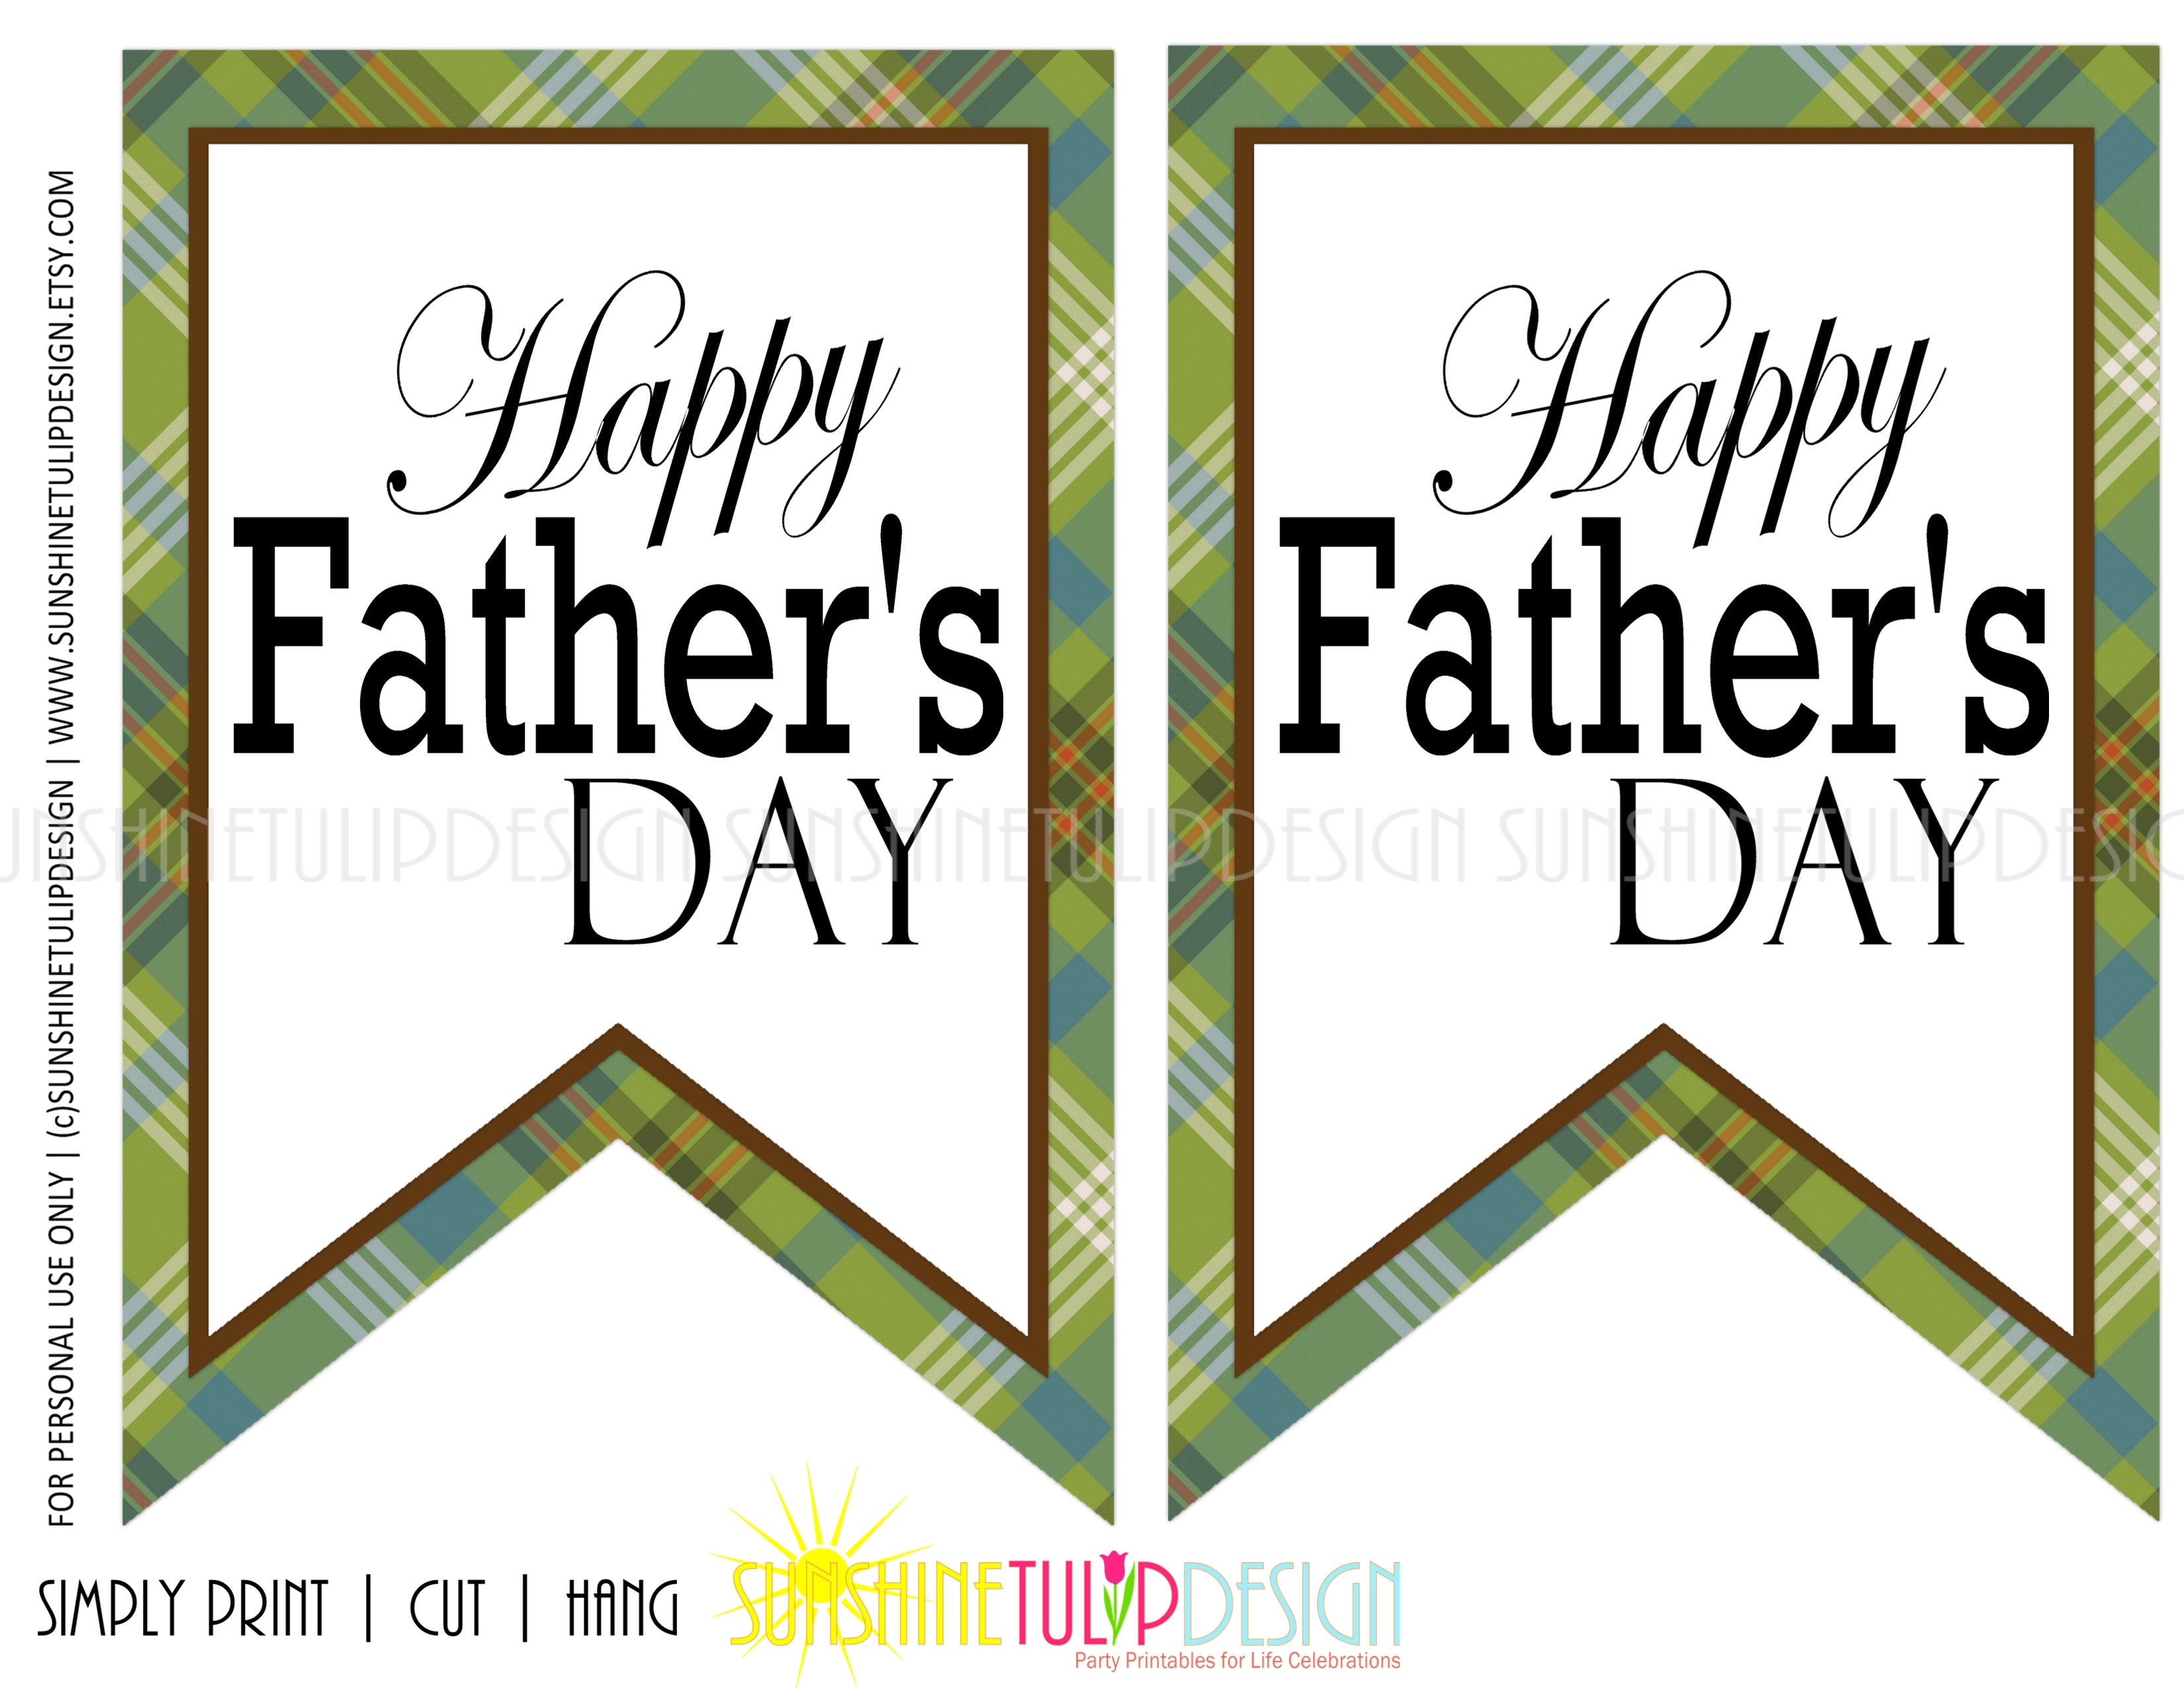 free-printable-happy-fathers-day-images